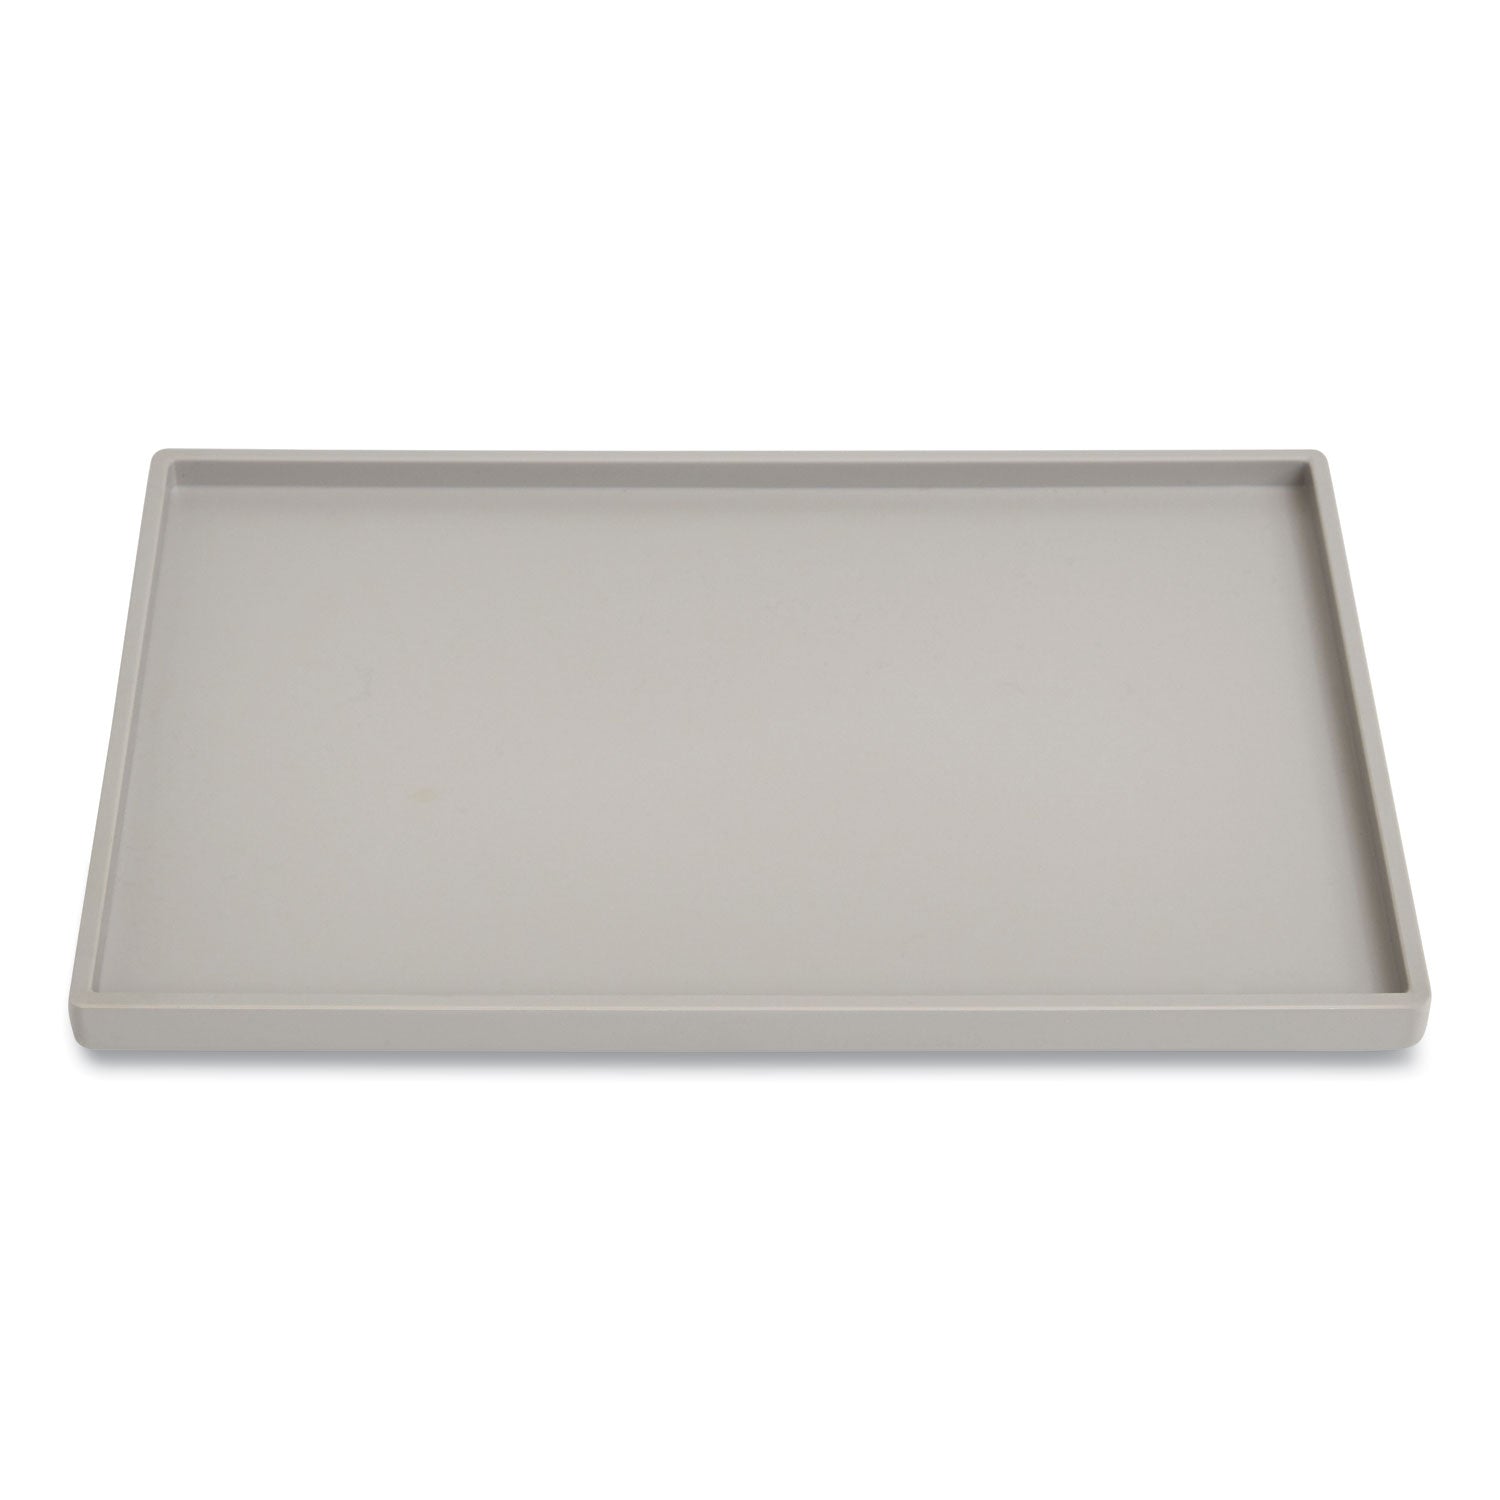 slim-stackable-plastic-mail-and-supplies-tray-1-section-#6-1-4-to-#16-envelopes-685-x-988-x-047-gray_tud24380419 - 1